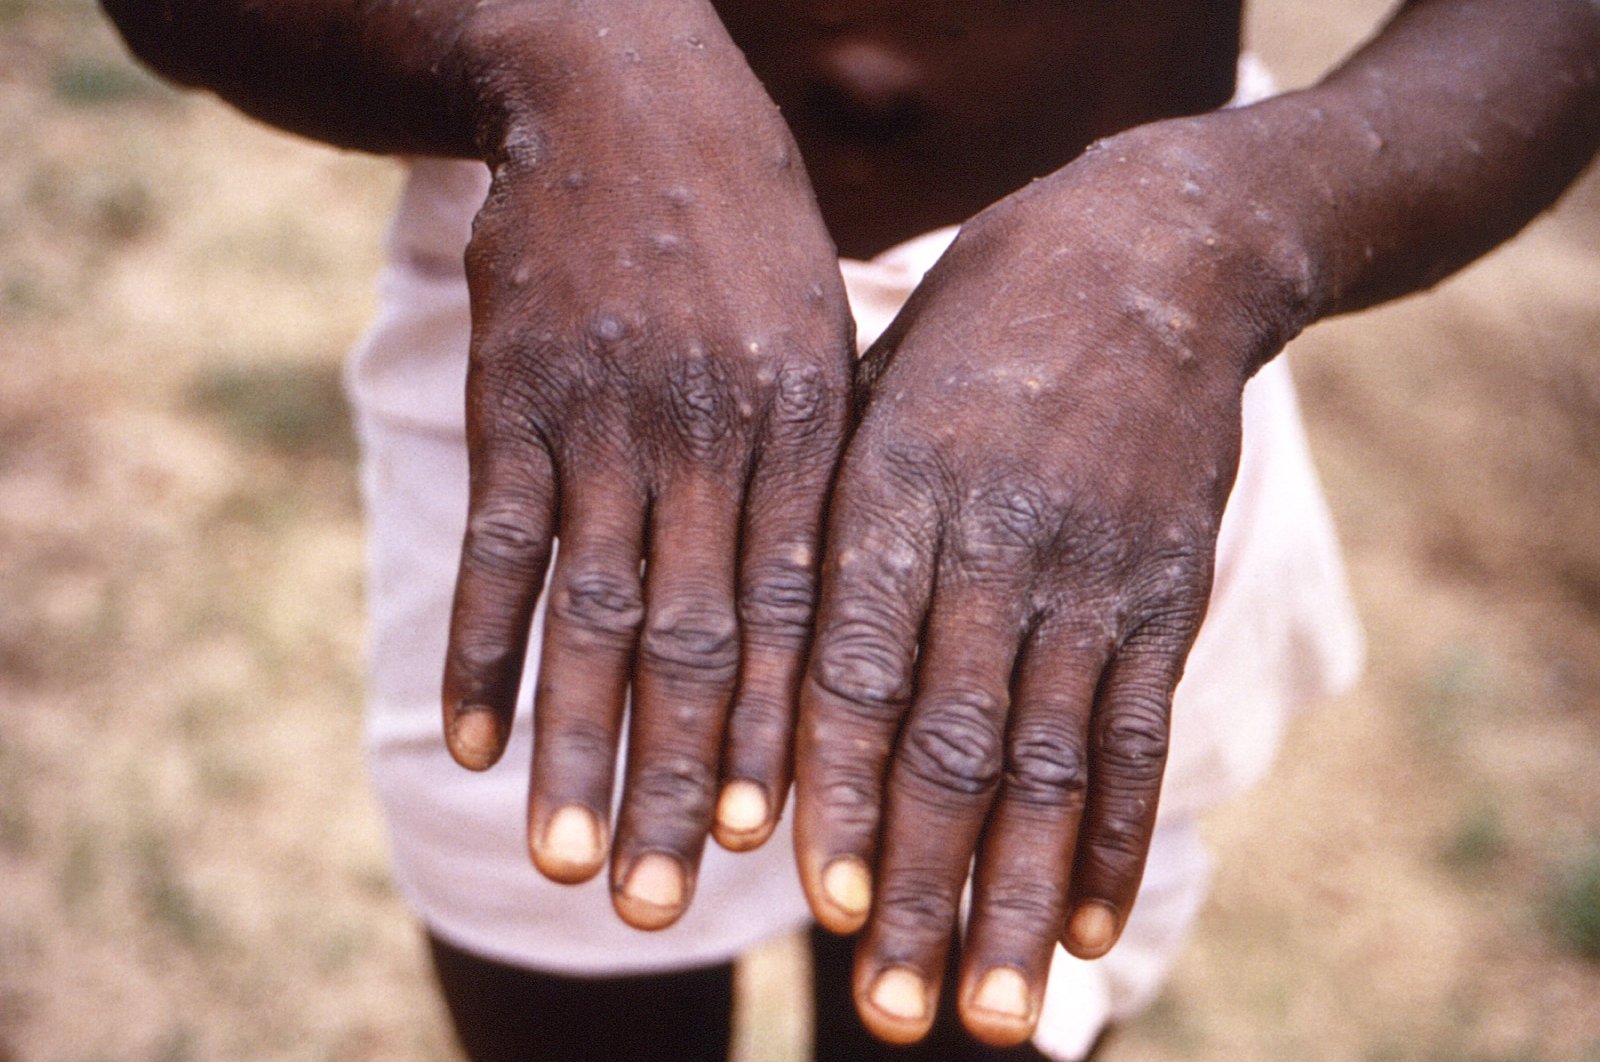 The hands of a patient with a rash due to monkeypox are seen during an investigation into an outbreak, which took place in the Democratic Republic of the Congo, 1996 to 1997, in this undated image obtained by Reuters on May 18, 2022. (Reuters Photo)